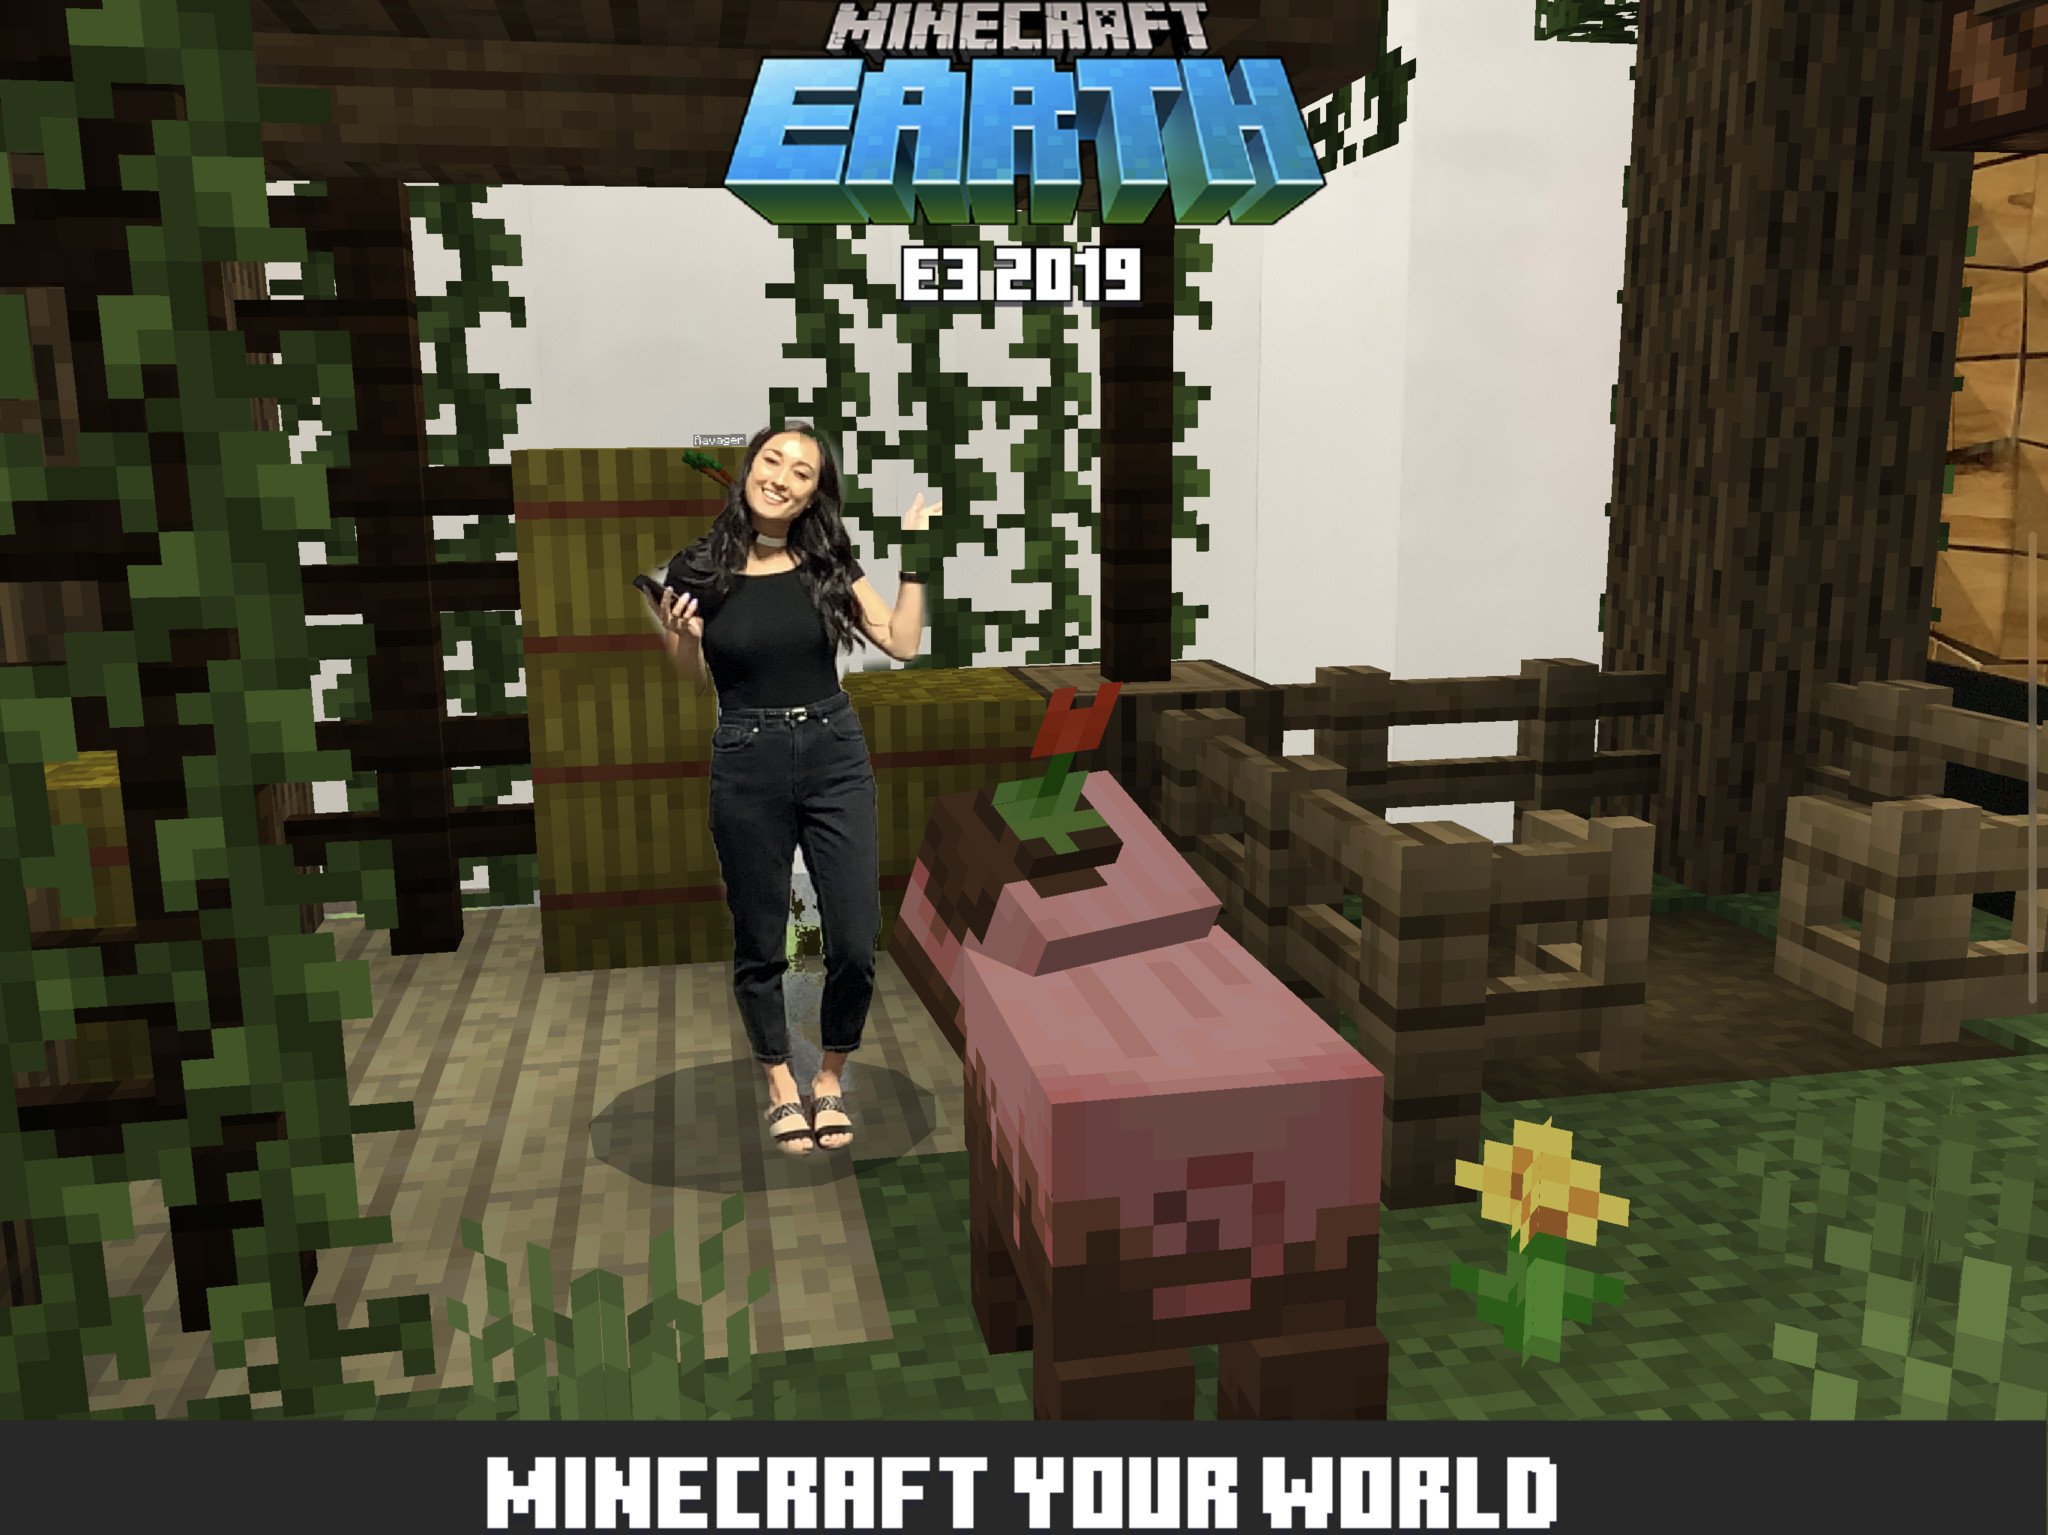 Minecraft Earth is live, so get tapping